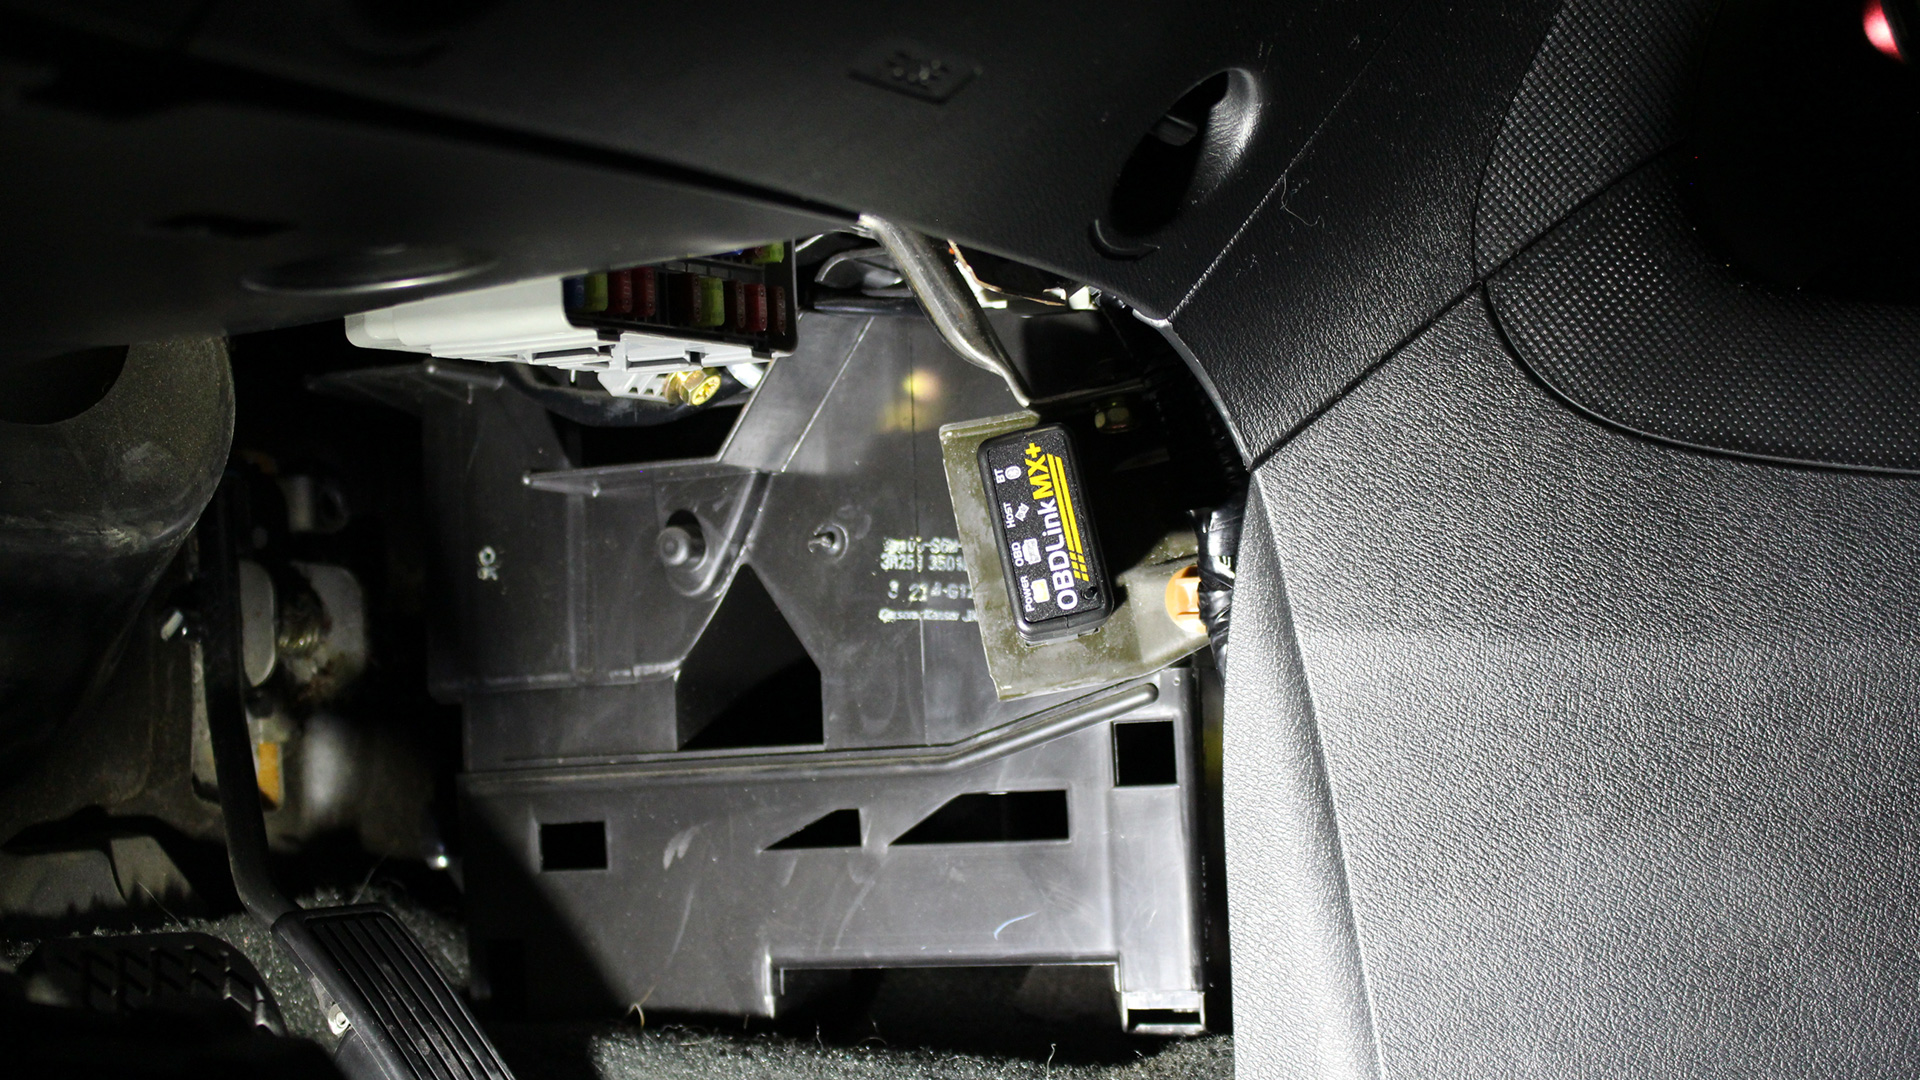 An OBDLink MX+ Bluetooth scanner is plugged into an Acura RSX OBD2 port.